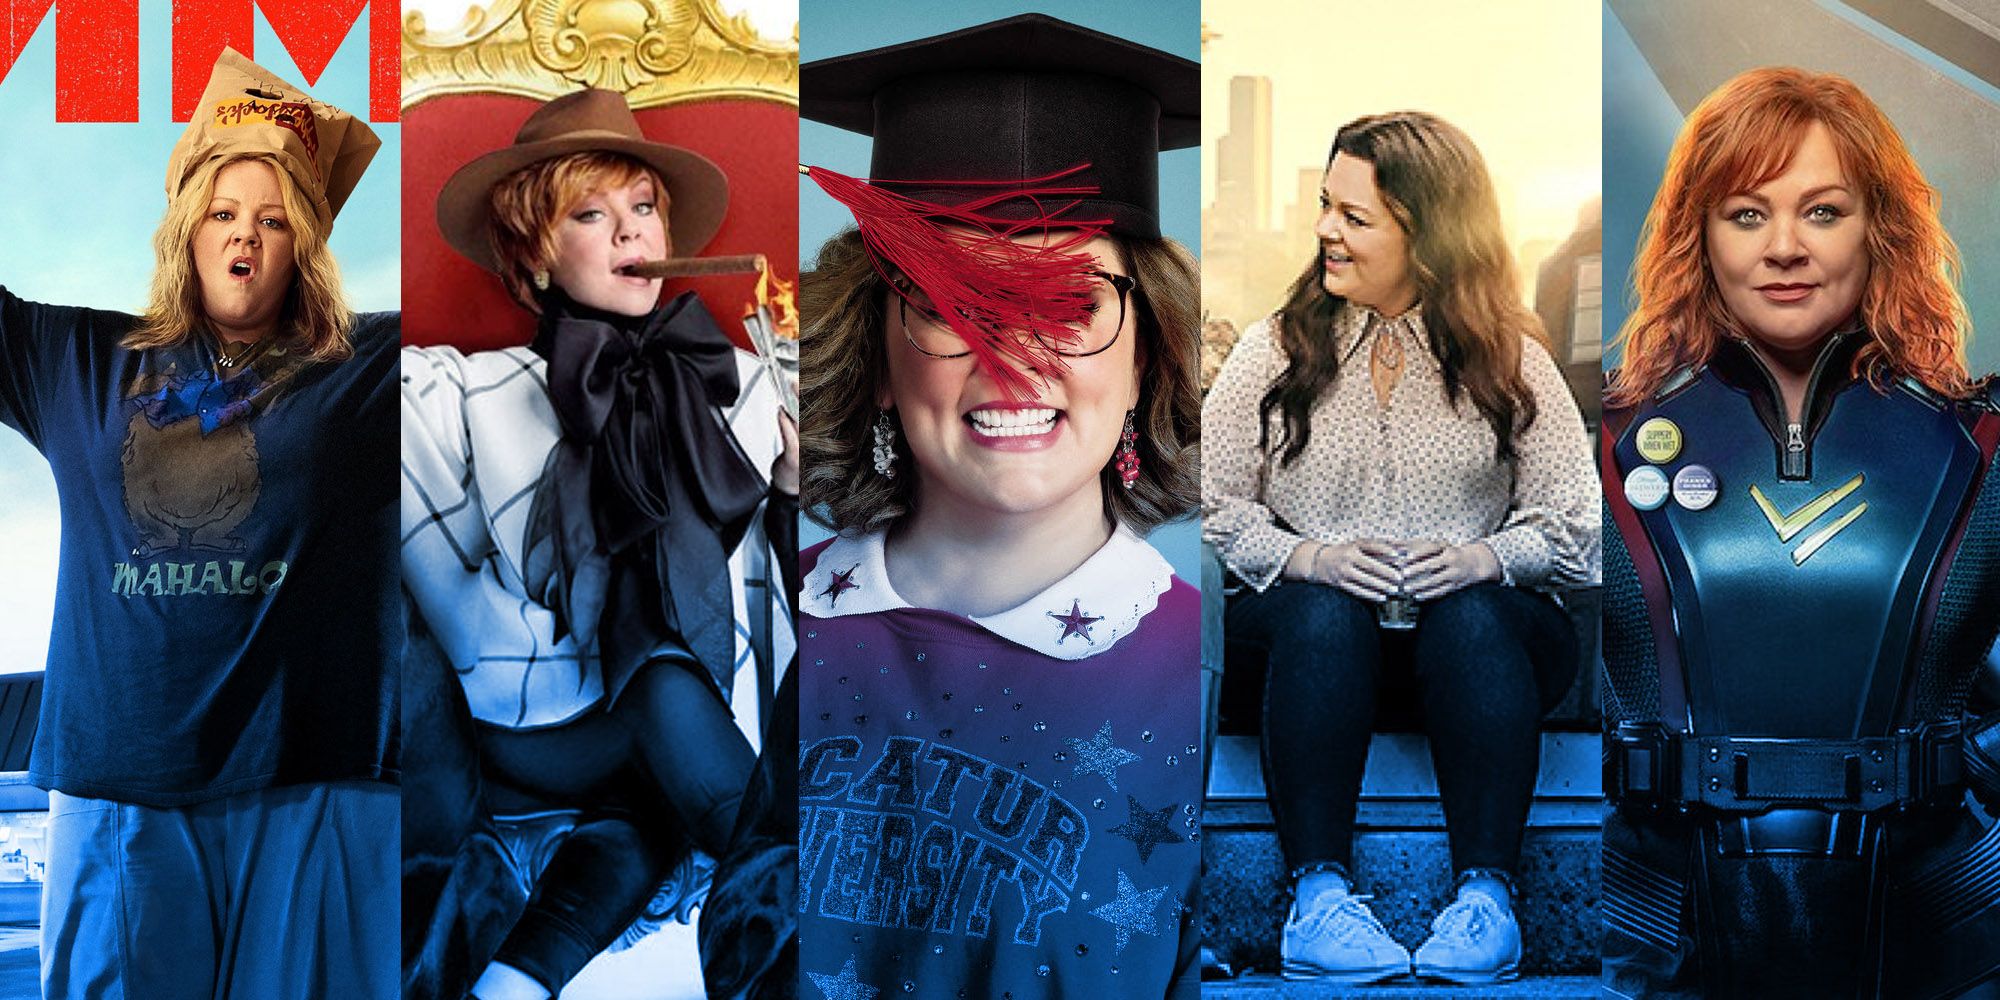 Melissa Mccarthy ben falcone movies Tammy the boss super intelligence thunder force life of the party